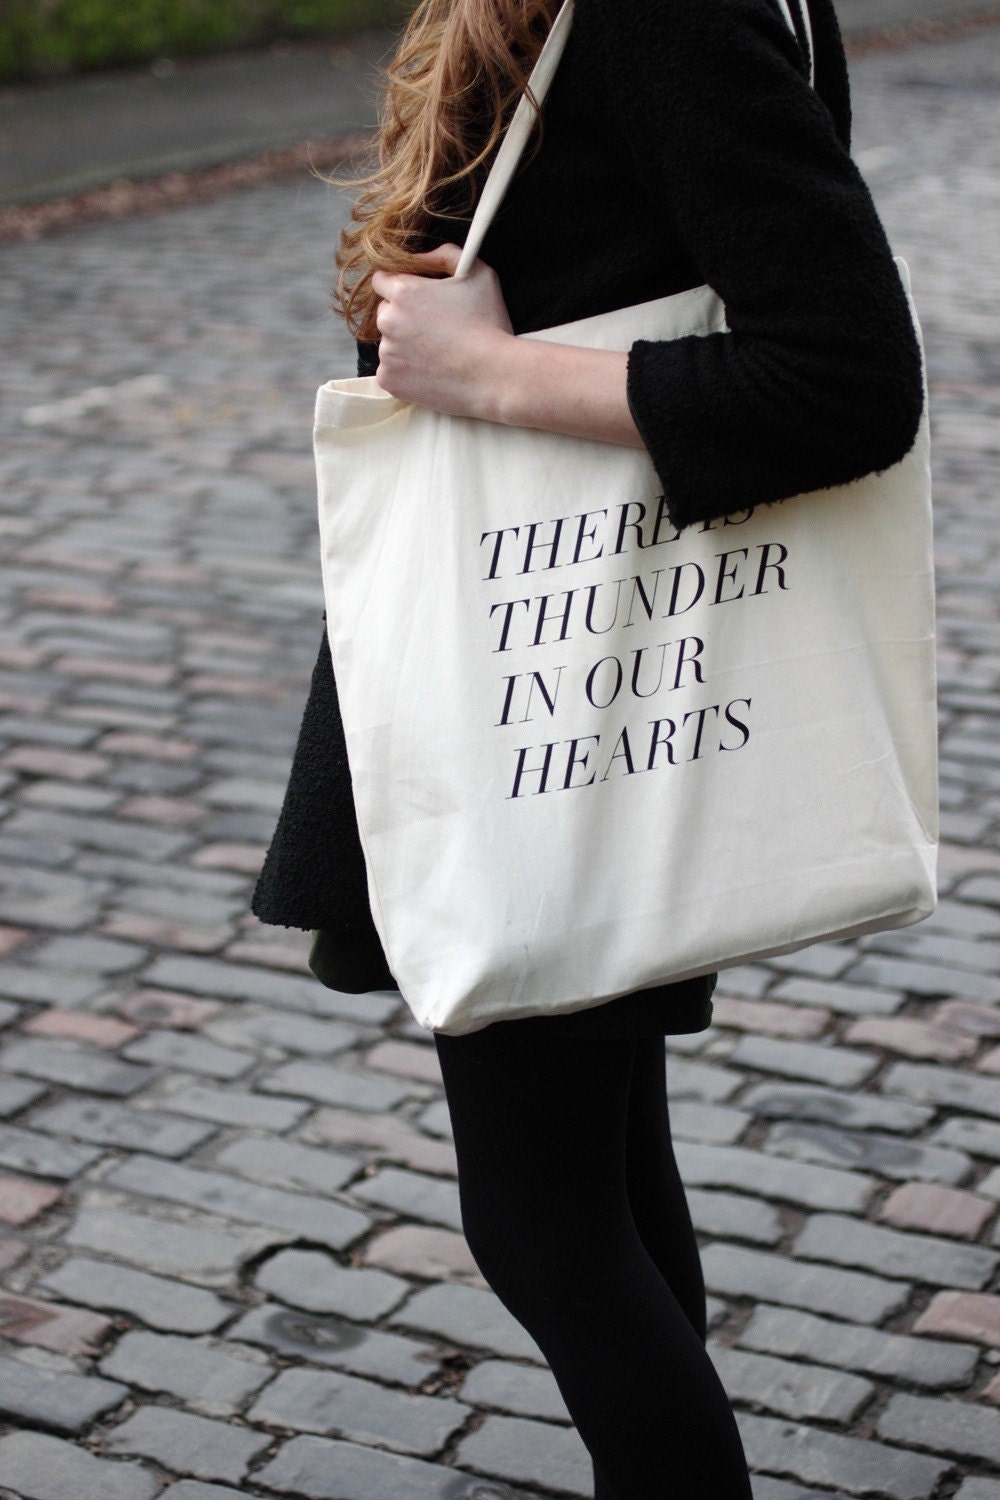 thunder in our hearts tote in fluro pink